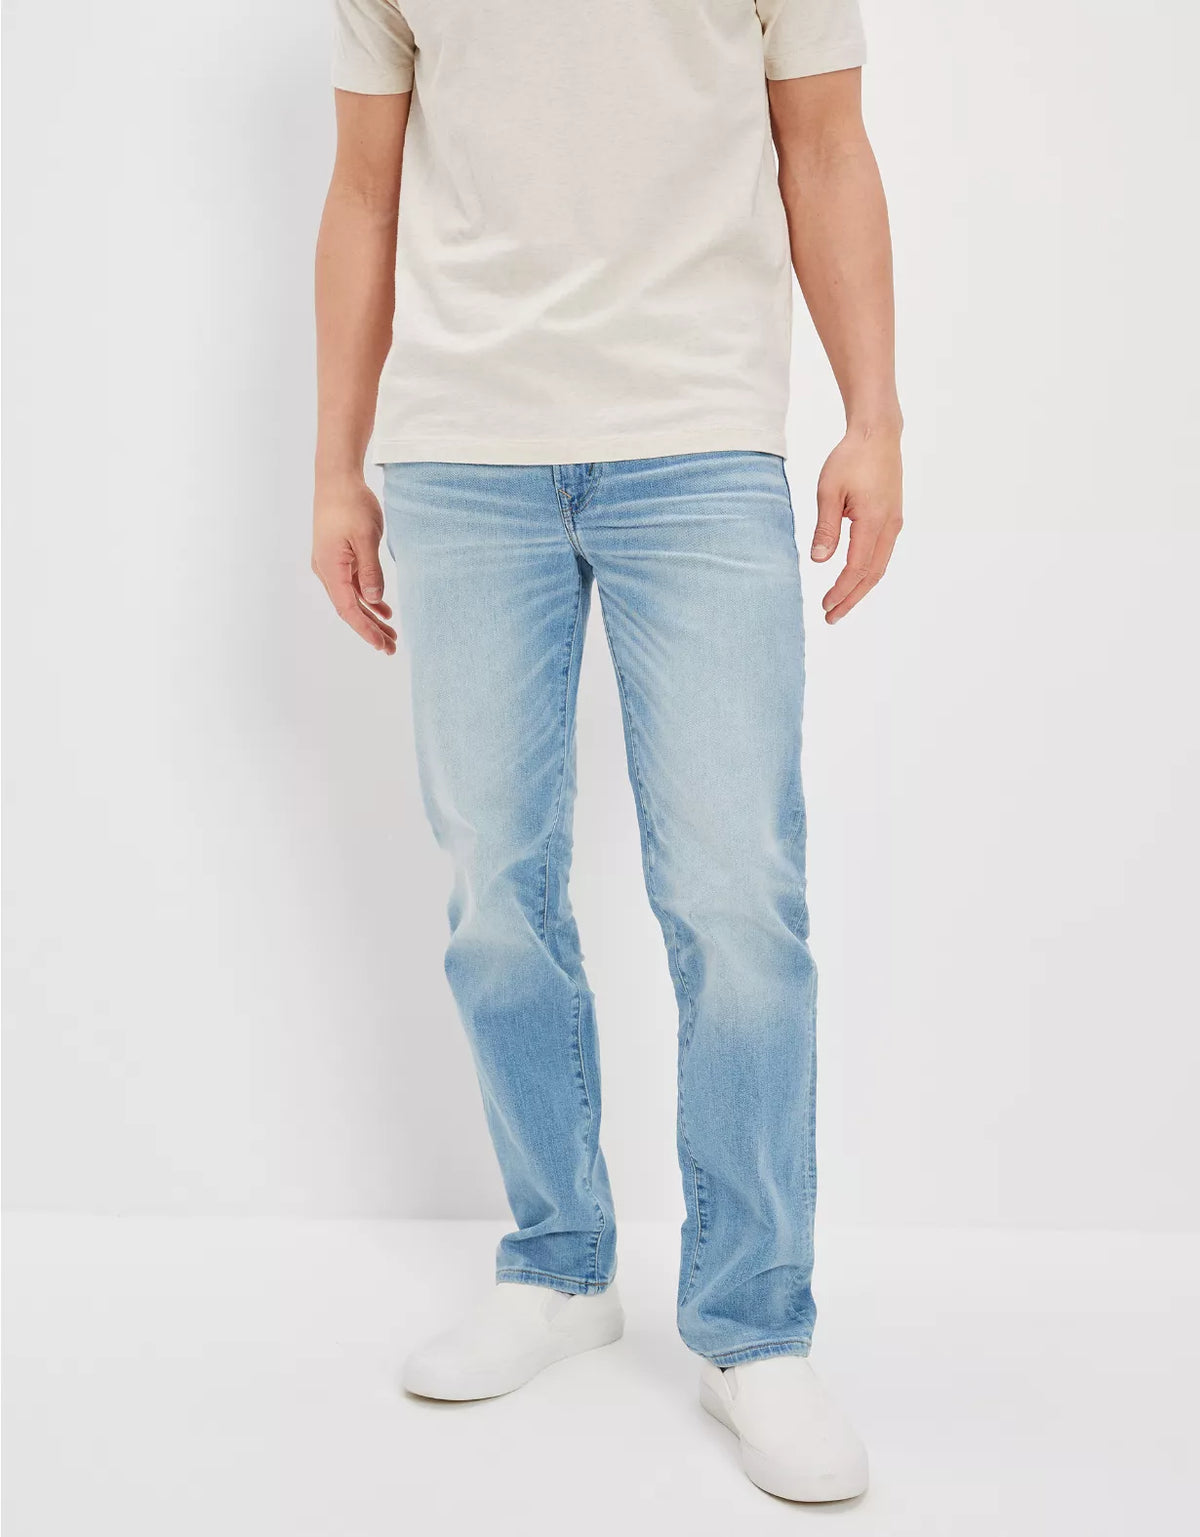 Best Quality Original Straight Jeans For Men - Stylish Men's Jeans - Available In Blue - AceCart